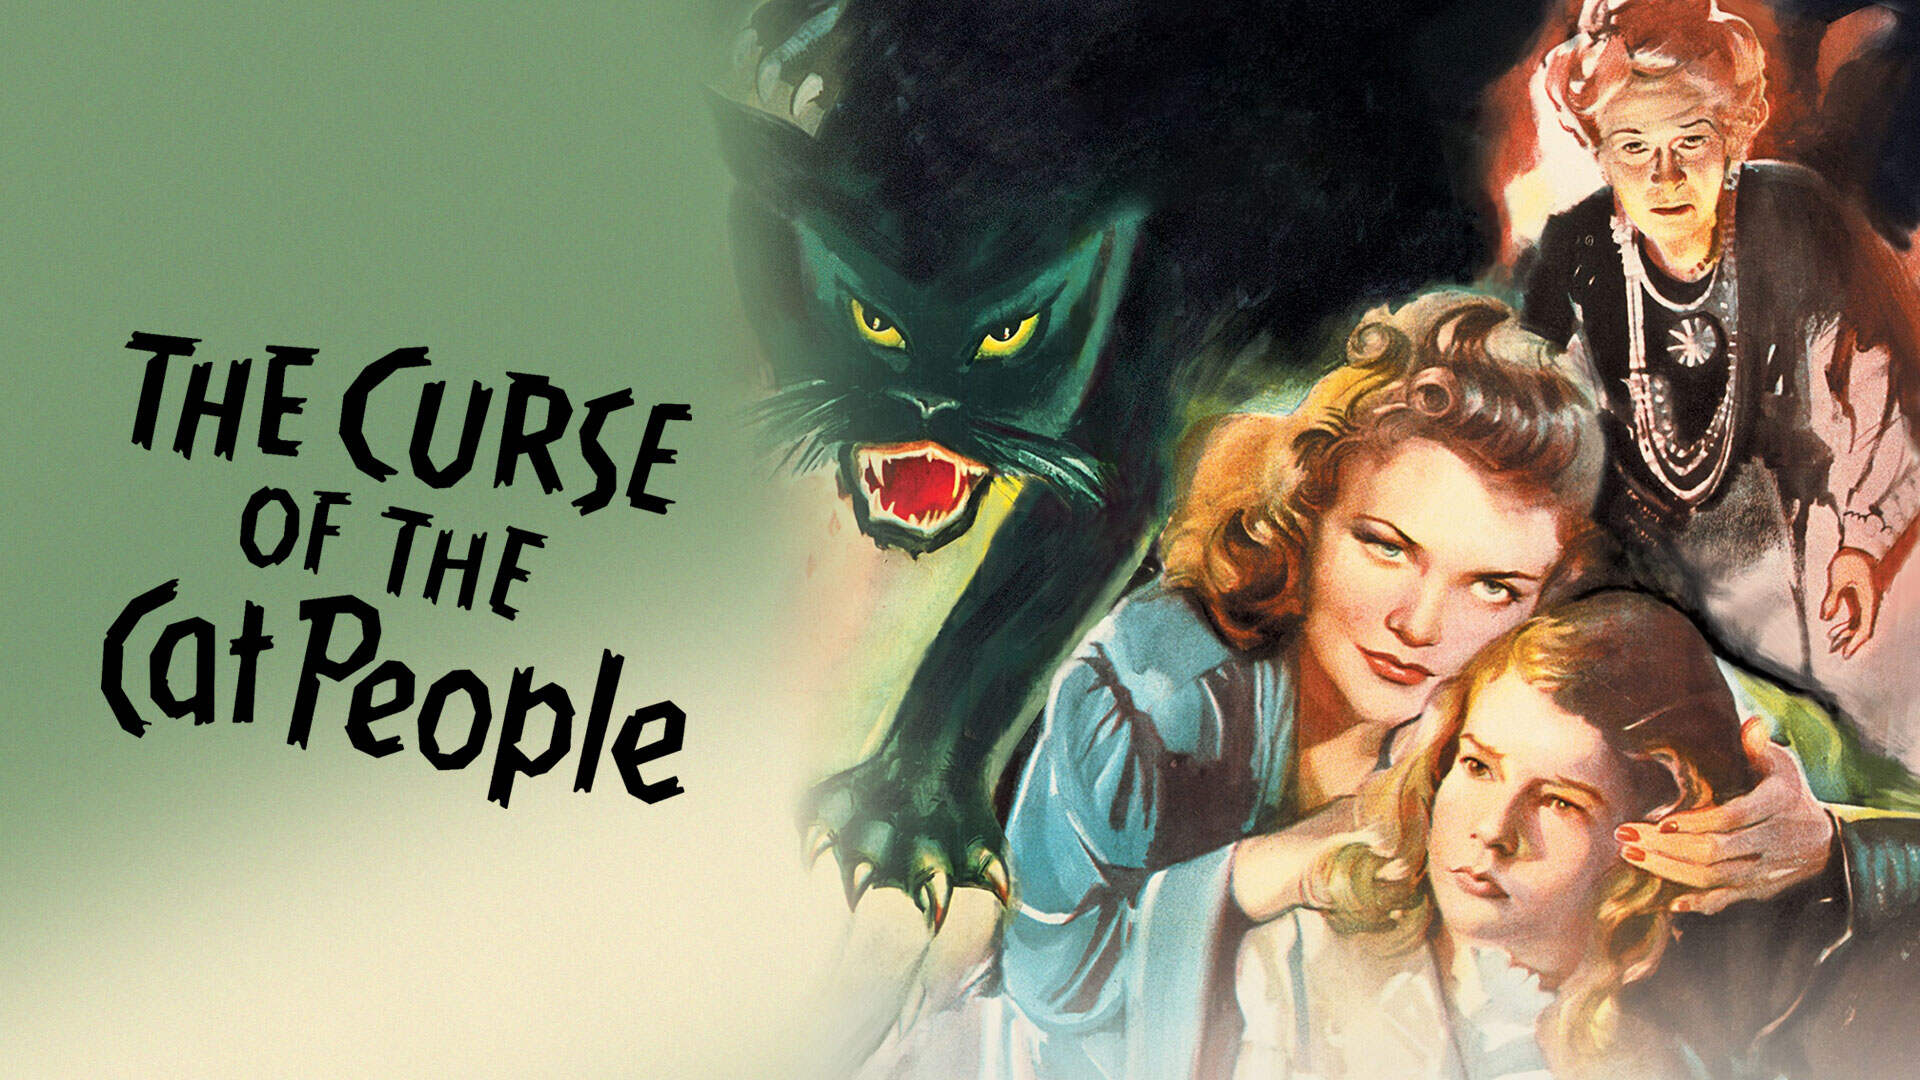 33-facts-about-the-movie-the-curse-of-the-cat-people